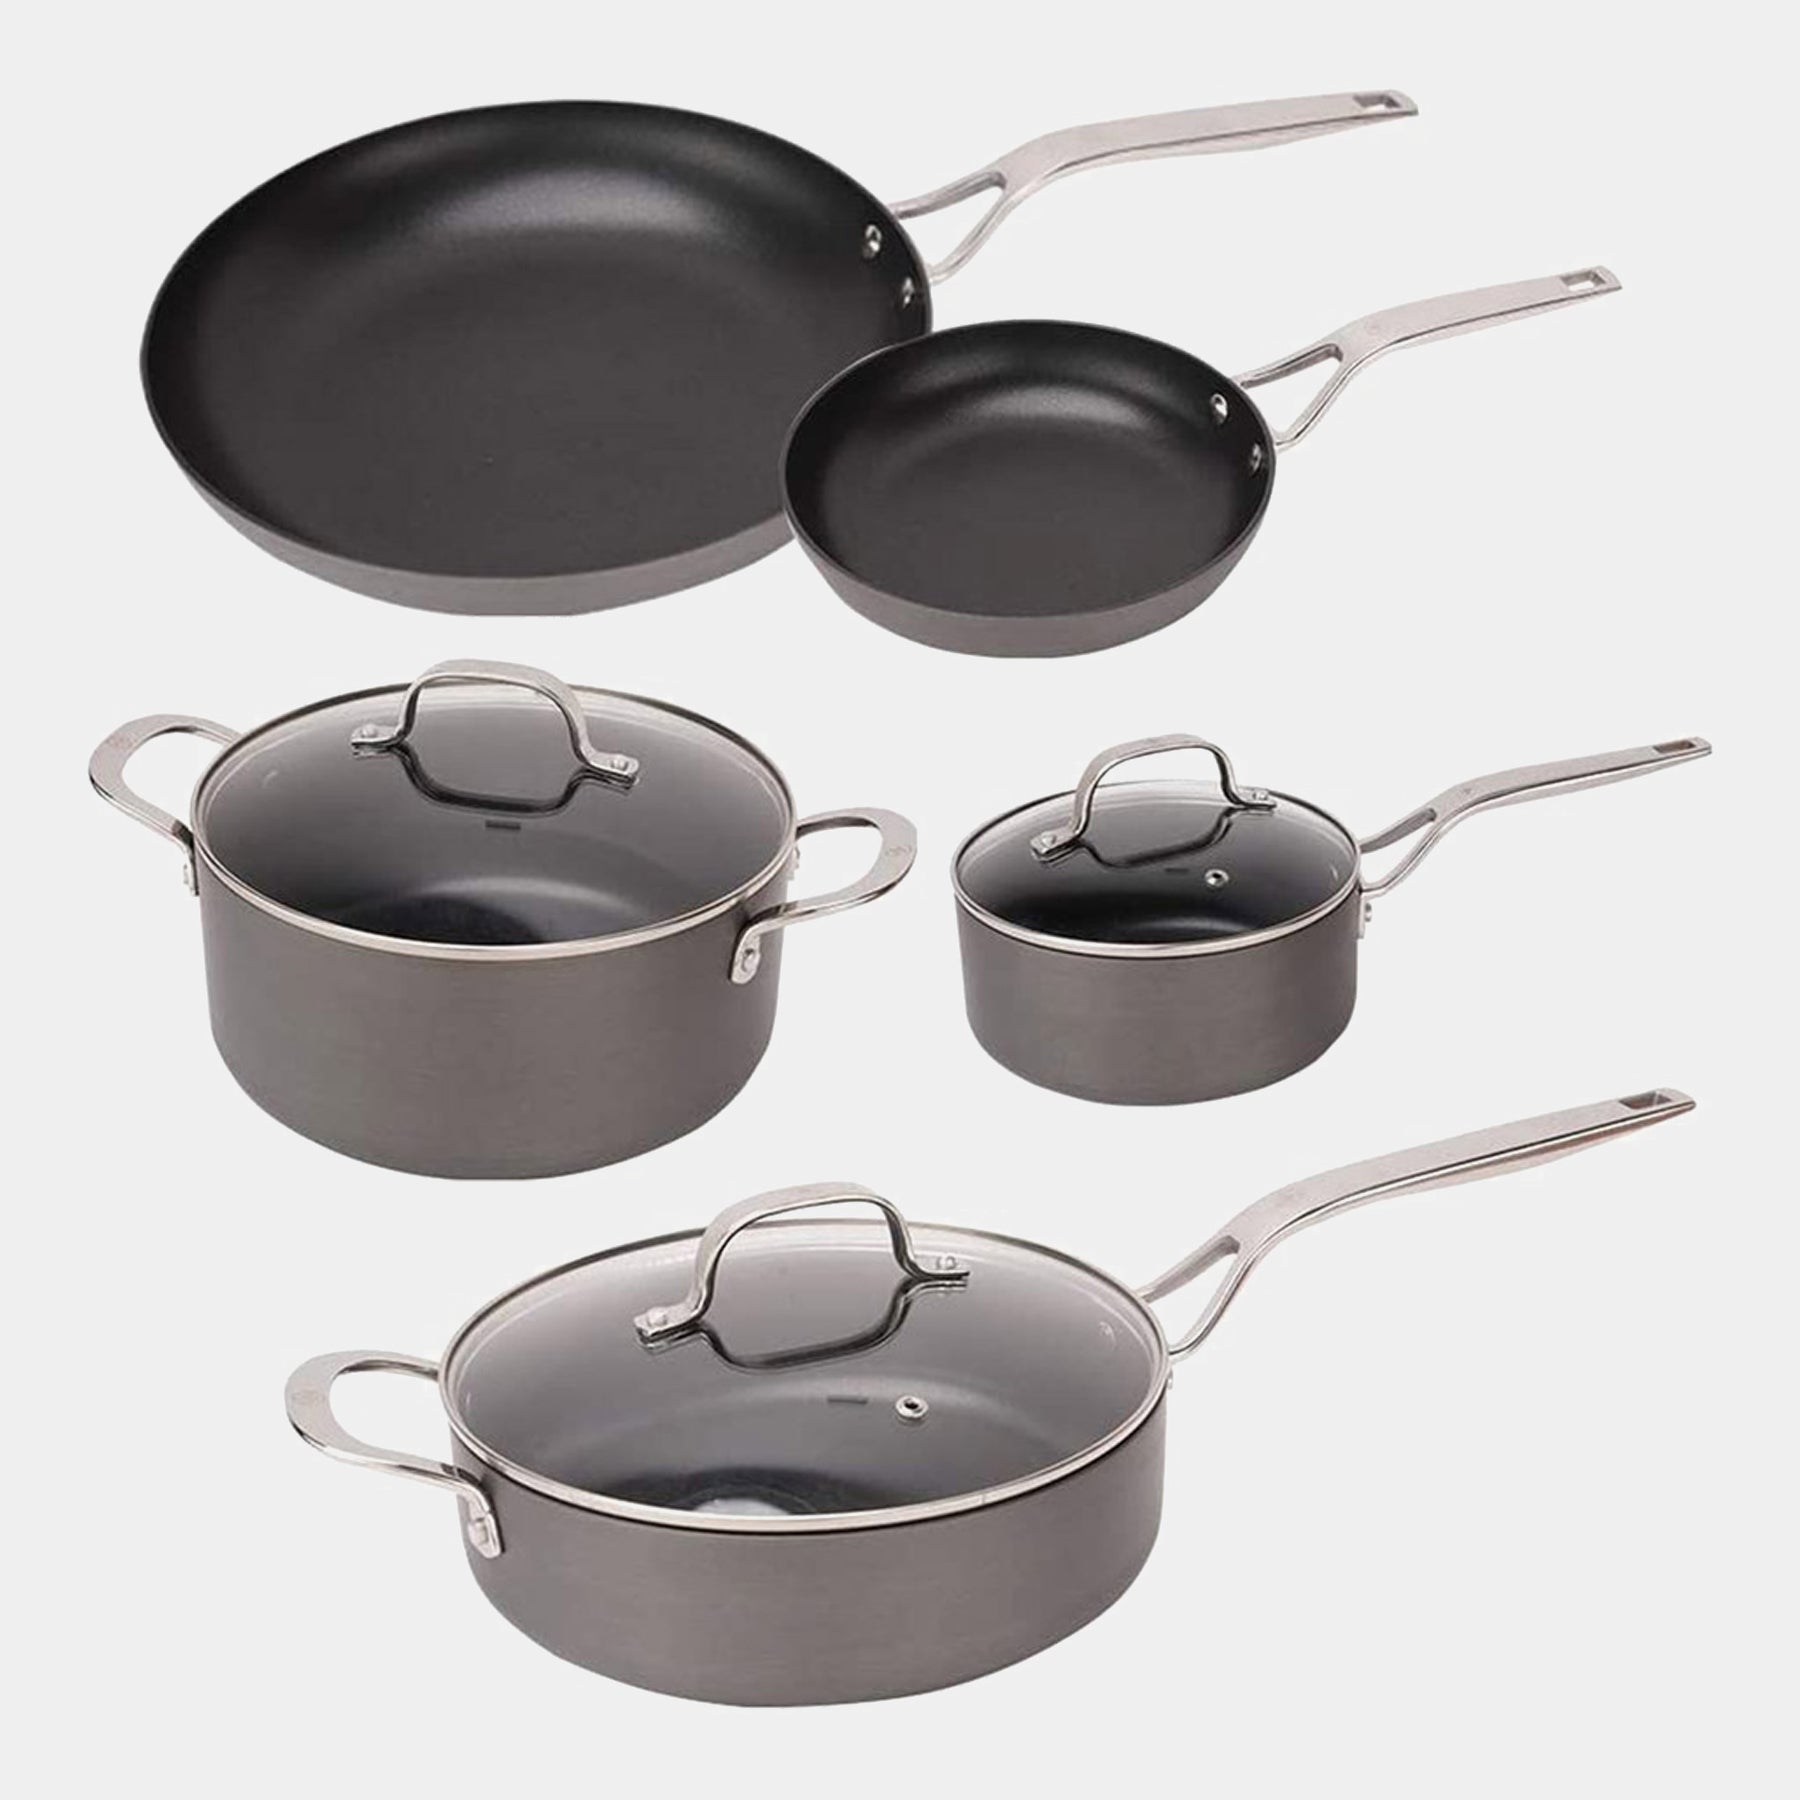 Hard Anodised 8-Piece Set Includes: 2 Fry Pans, a Stock Pot with Lid, a Sauce Pan with Lid and a Saute pan with Lid